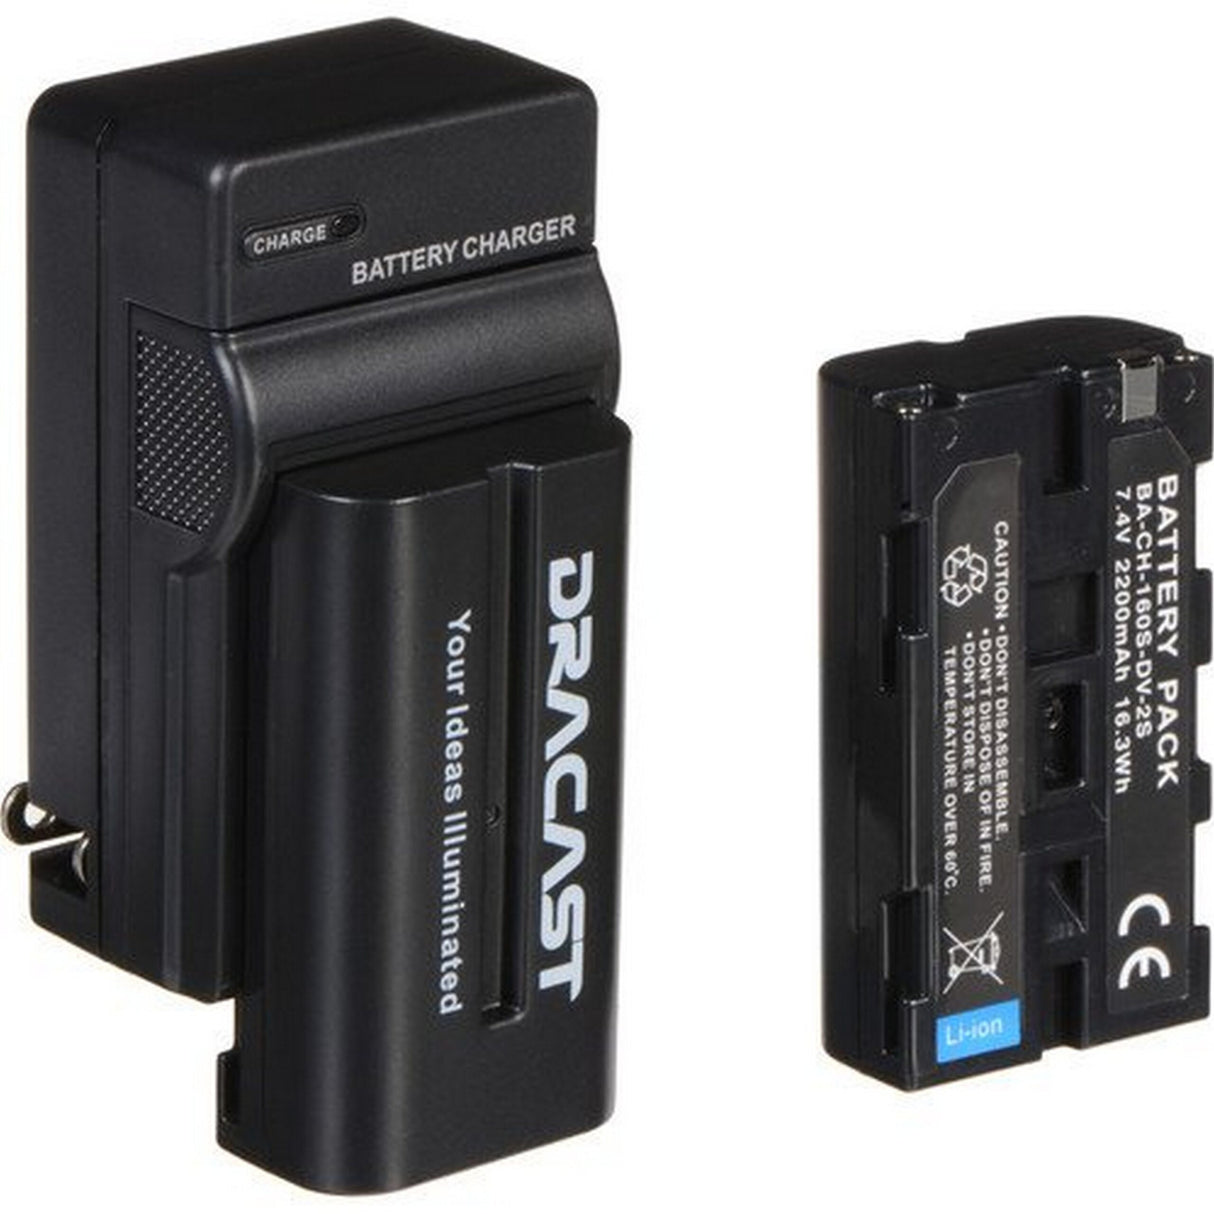 Dracast 2x NP-F 2200mAh Battery and 1 Charger Kit